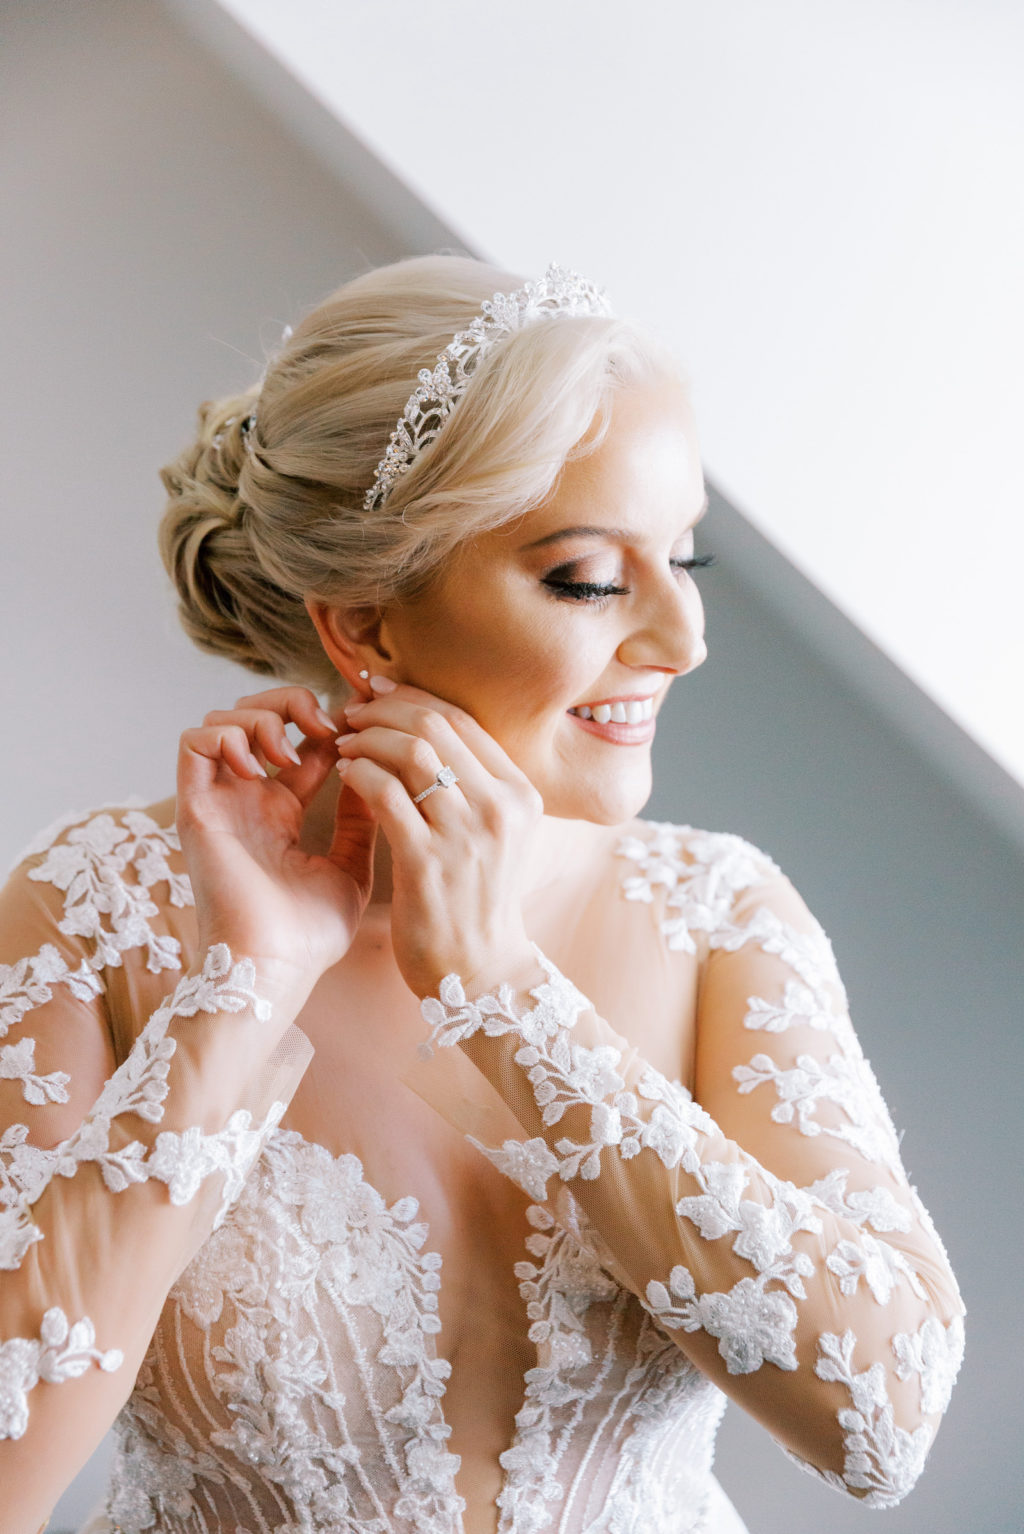 Tampa Bay Bride Getting Ready, Wearing Rhinestone Tiara, Romantic Adam Zohar A-Line Wedding Dress with Illusion Neckline and Lace Sleeve Detailing | Florida Wedding and Bridal Boutique Isabel O'Neil Bridal Collection